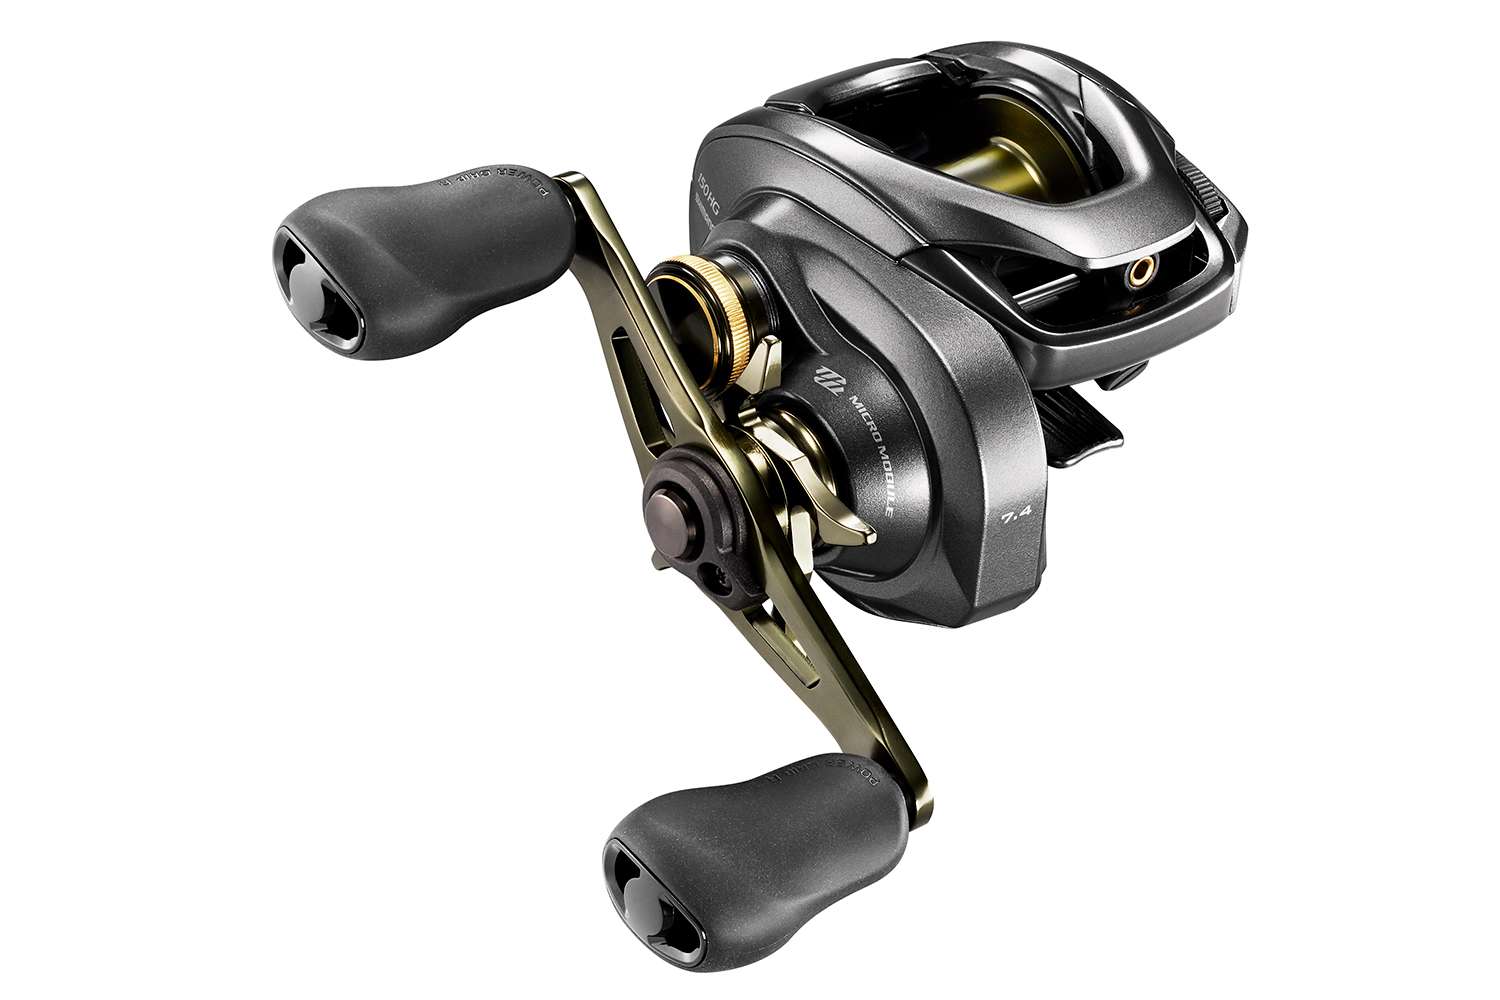 <p><b>Shimano Curado DC Baitcasting Reels</b></p> <br>
Utilizing a microcomputer to control brake force at every moment of the cast, Shimano brings it I-DC4 digital control technology to a new series of Curado baitcasting reels. Built upon a reel already known for its durability, dependability, and versatility, the new Shimano Curado DC reels will quickly allow all anglers to cast smarter by monitoring spool speed 1,000 times every second and applying the perfect amount of braking to prevent backlash and maximize distance. Being introduced at ICAST 2018 and available in August, the DC series include the Curado DC150 and left-hand retrieve DC151 with 6.2:1 gear ratios - 26 inches per crank (IPC), the Curado 150HG and 151HG with 7.4:1 gear ratios and 31 IPC, and the even higher speed Curado 150XG and 151XG with 8.5:1 gear ratios and 36 IPC.</p><br>
<p>With the I-DC4 braking technology, anglers can fish a variety of lures and in any weather conditions, with limited-to-no adjustments to the reel. There are four external adjustable brake settings depending on fishing situations. The settings are âmax distance modeâ for ultra-long casts in calmer conditions; a âbraid/mono modeâ when using those types of lines on the reel; a âfluorocarbon modeâ that is best when using these stiffer lines; and a âskipping modeâ for putting lure in hard-to-reach spots like under docks or when flipping brushpiles.</p>
<p>Designed within the Curado series, the new DC reels include key Shimano features including MicroModule gears, rigid HAGANE body, CI4+ material sideplate, X-Ship and A-RB anti-rust bearings. All six reels will hold up to 105 yards of 40-pound test PowerPro braid, or up to 90 yards of 14-pound test mono. Paying homage to its Curado roots with green accents to the handle and spool, the reels retail for <b><p>$249.99</b></p> 